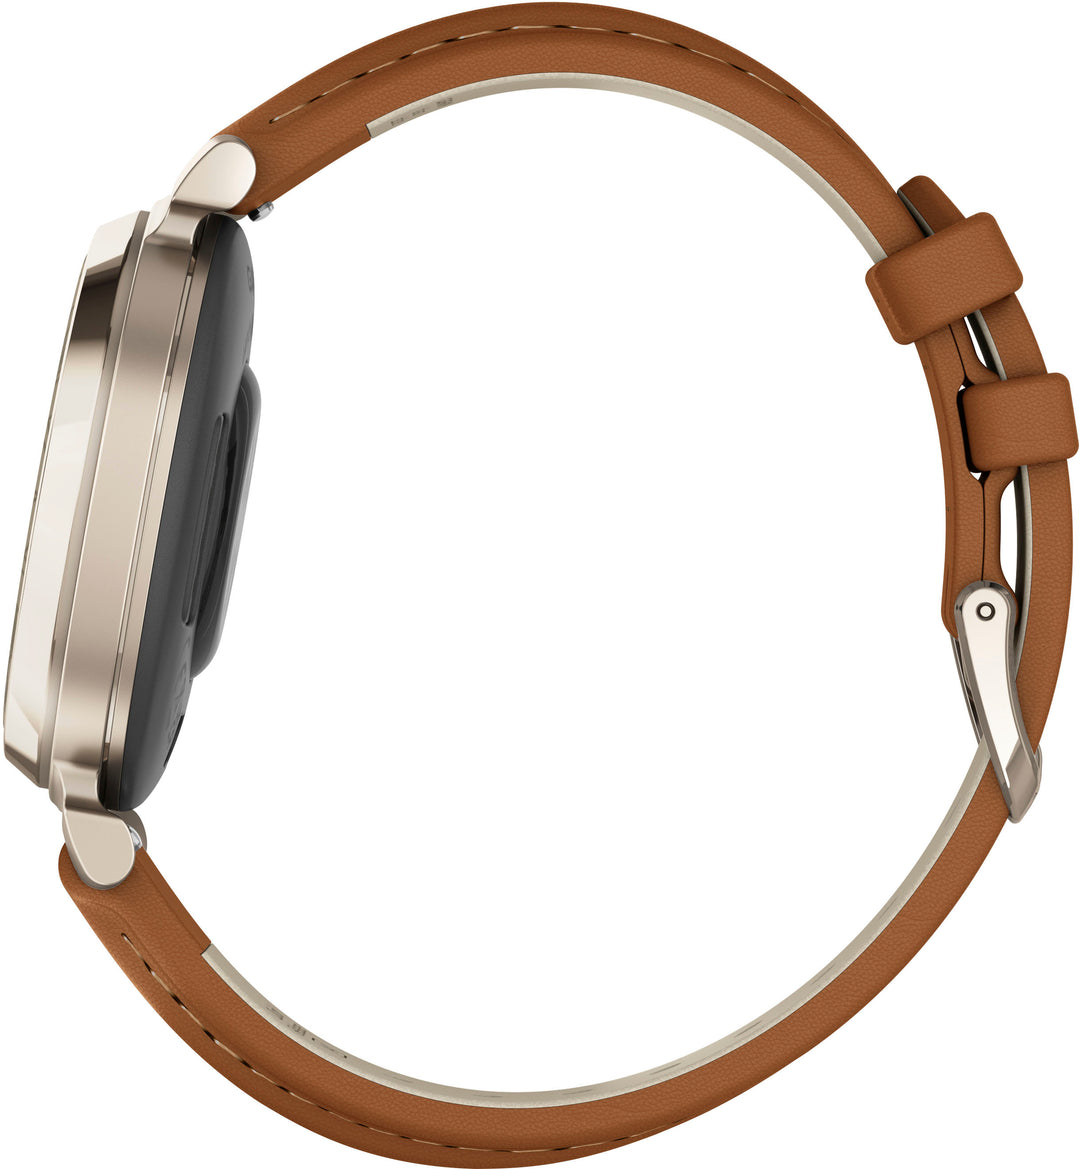 Garmin - Lily 2 Classic Smartwatch 34 mm Anodized Aluminum - Cream Gold with Tan Leather Band_4